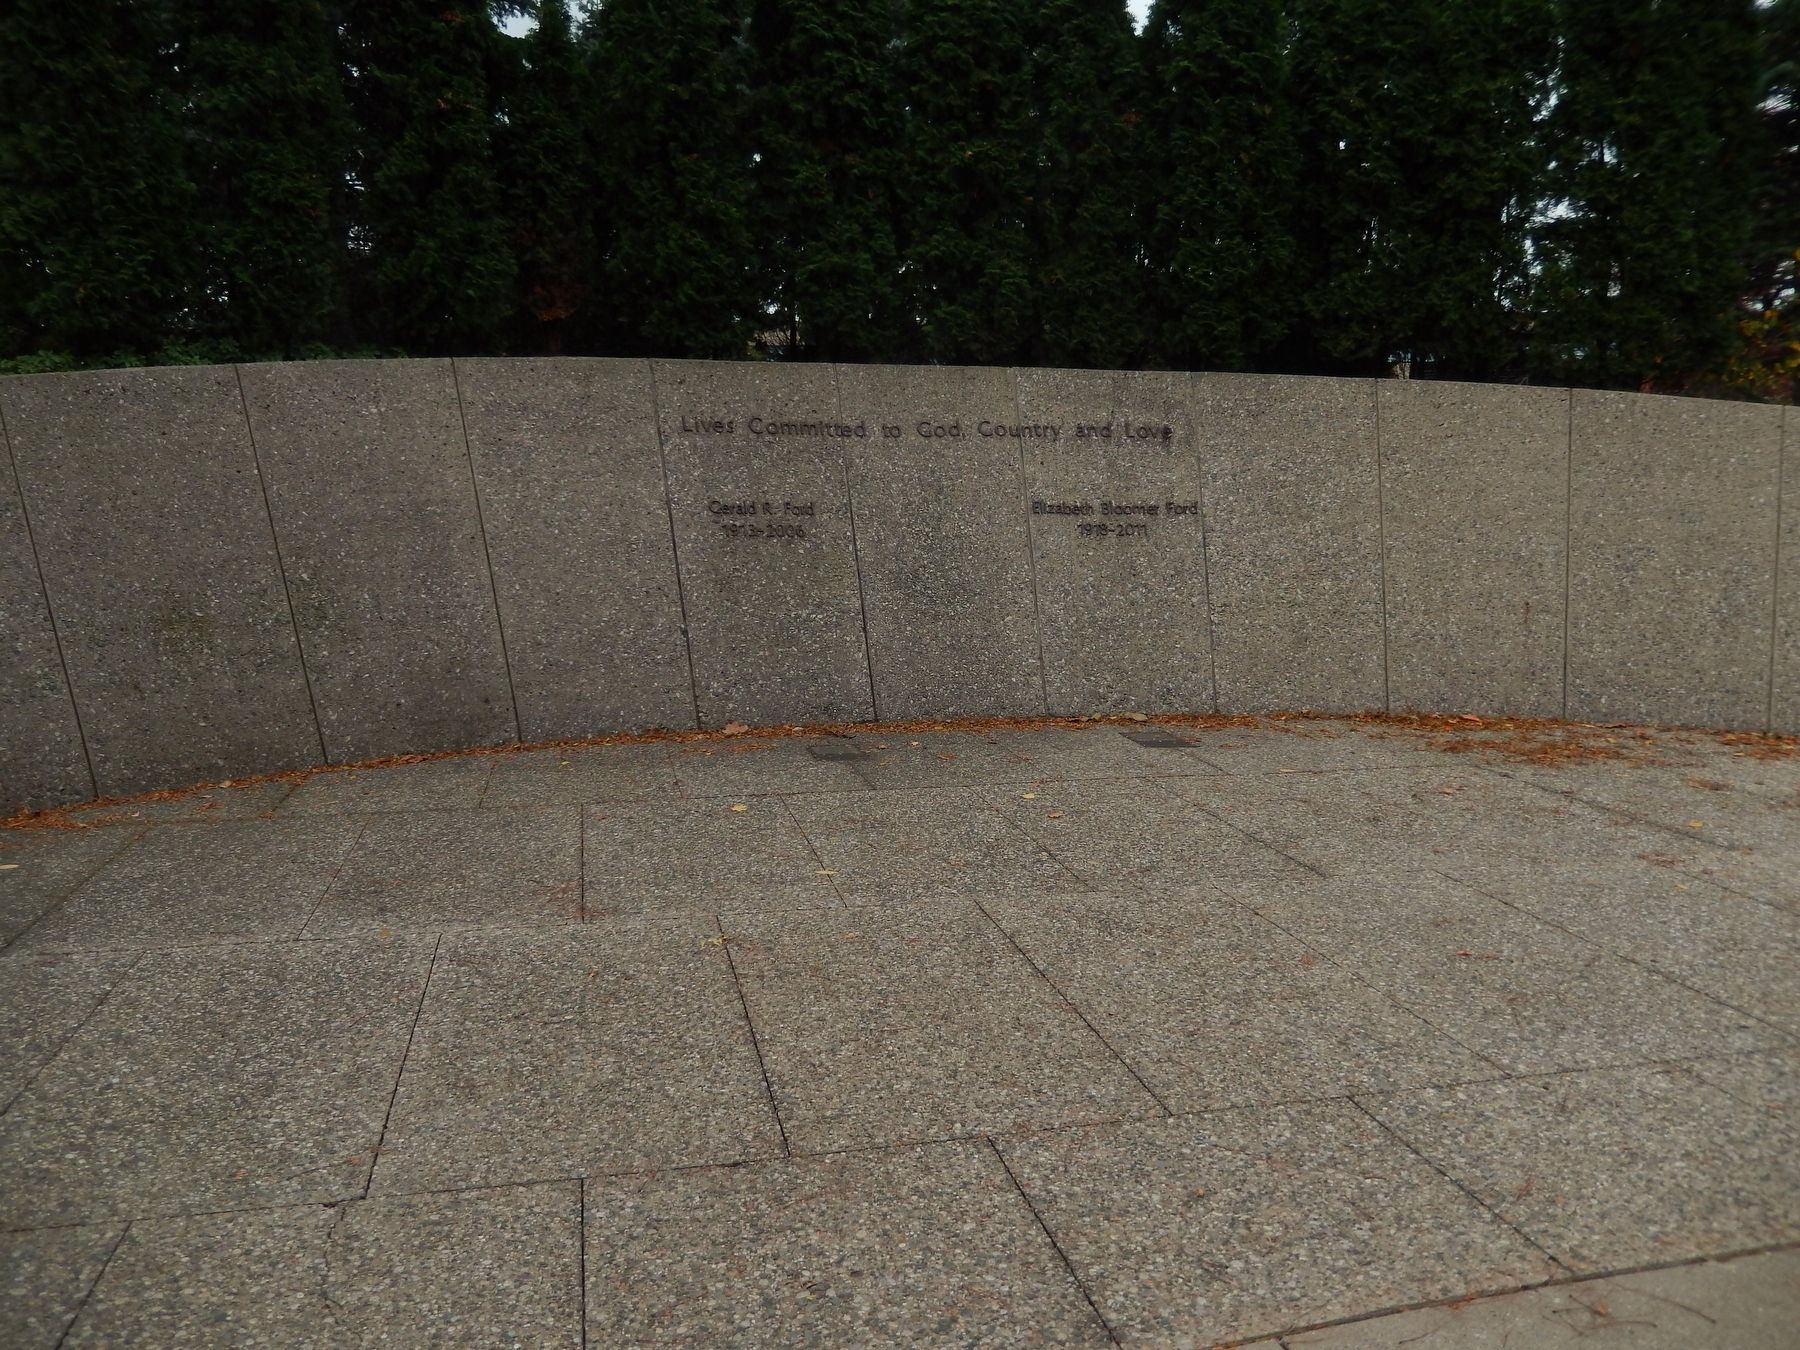 Final Resting Place of Gerald R. Ford & Elizabeth R. Ford image. Click for full size.